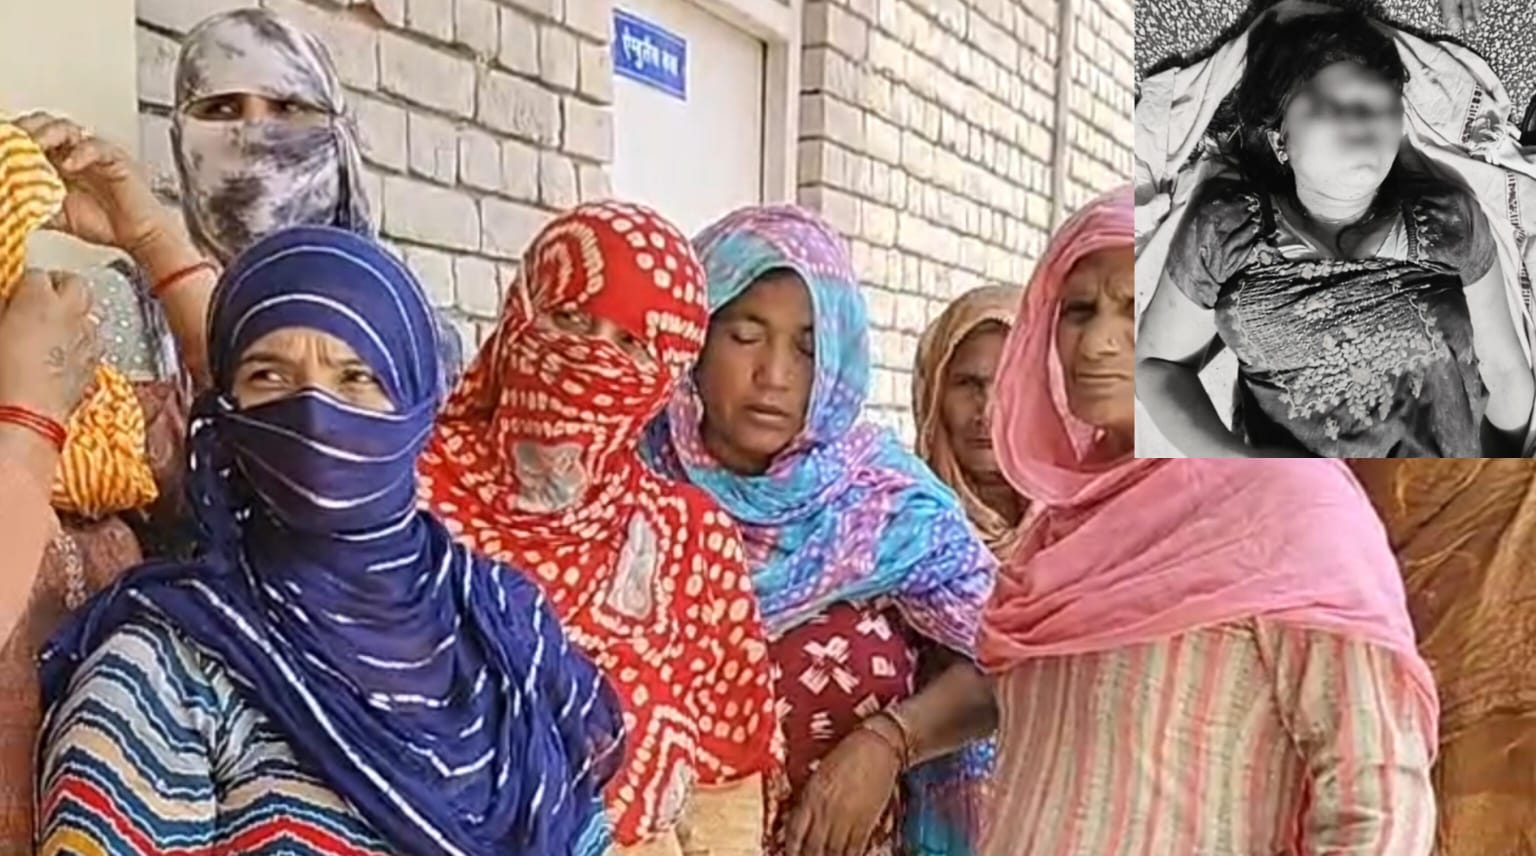 Jind murder news: Suspicious death of a woman in Jind, maternal side accused of murder, in-laws side said that death was due to drowning in the pond